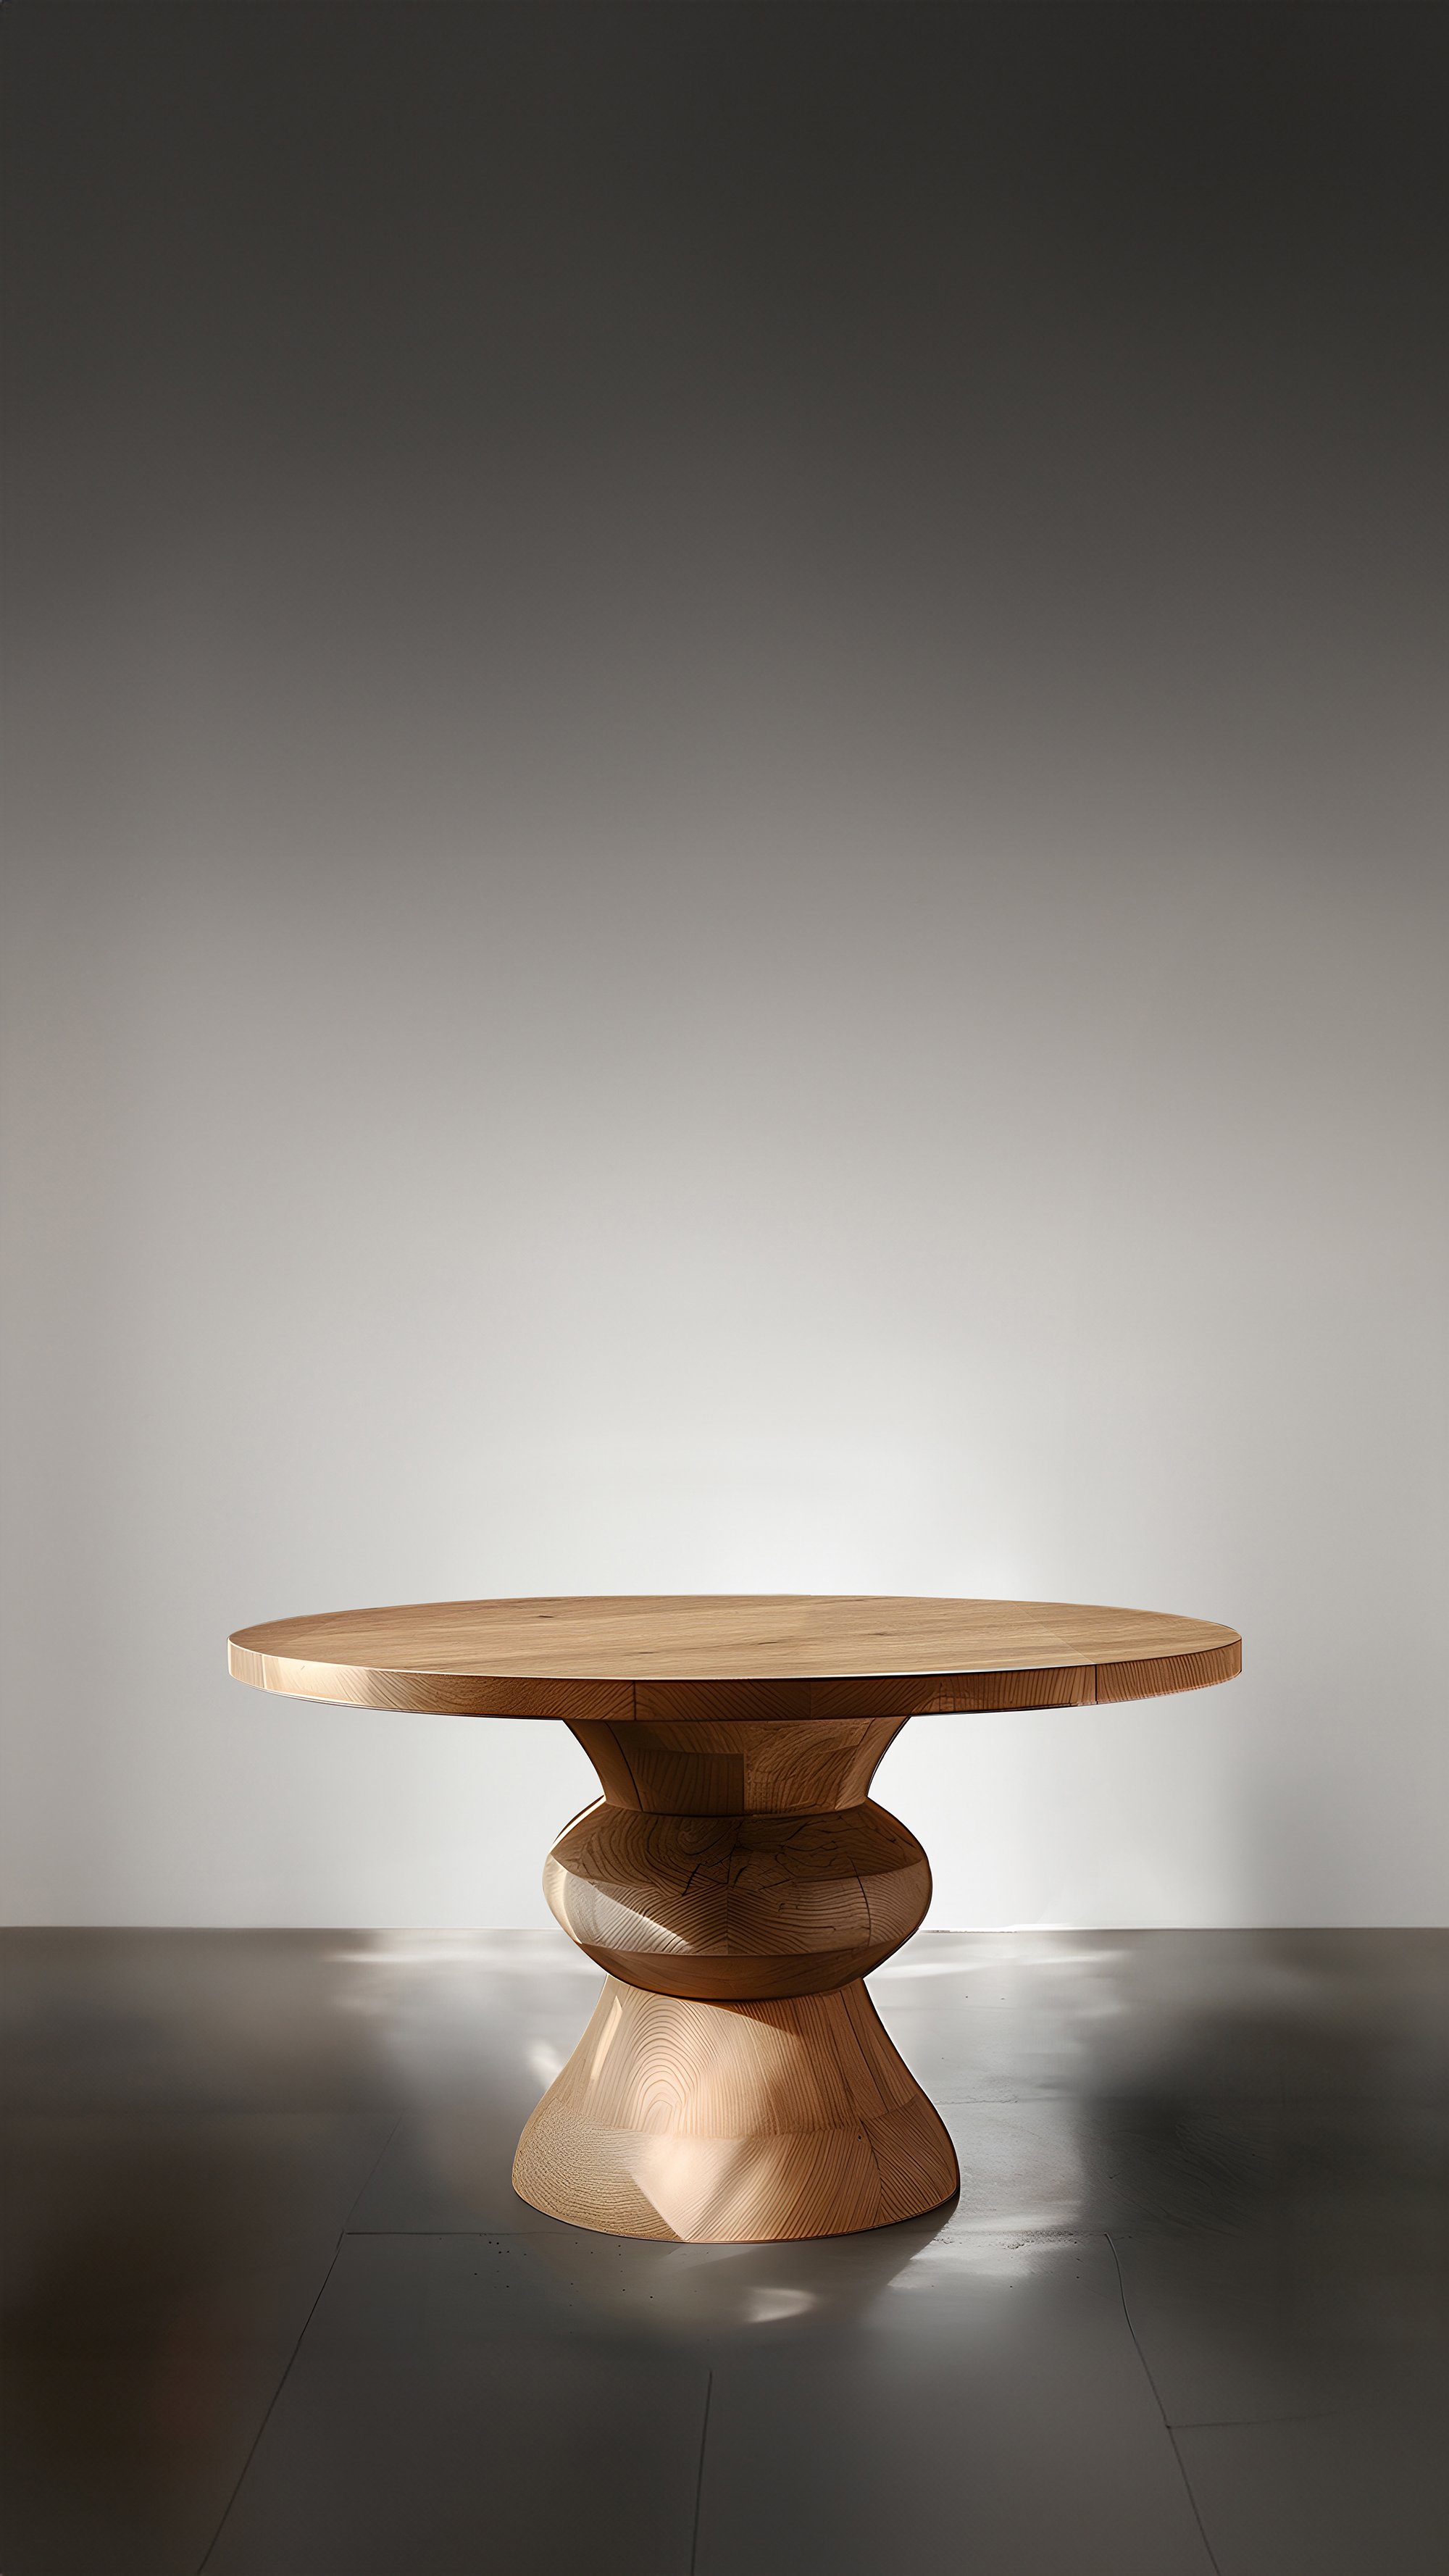 Joel Escalona's Socle No14, Solid Wood Cocktail Tables, Design First - 4.jpg